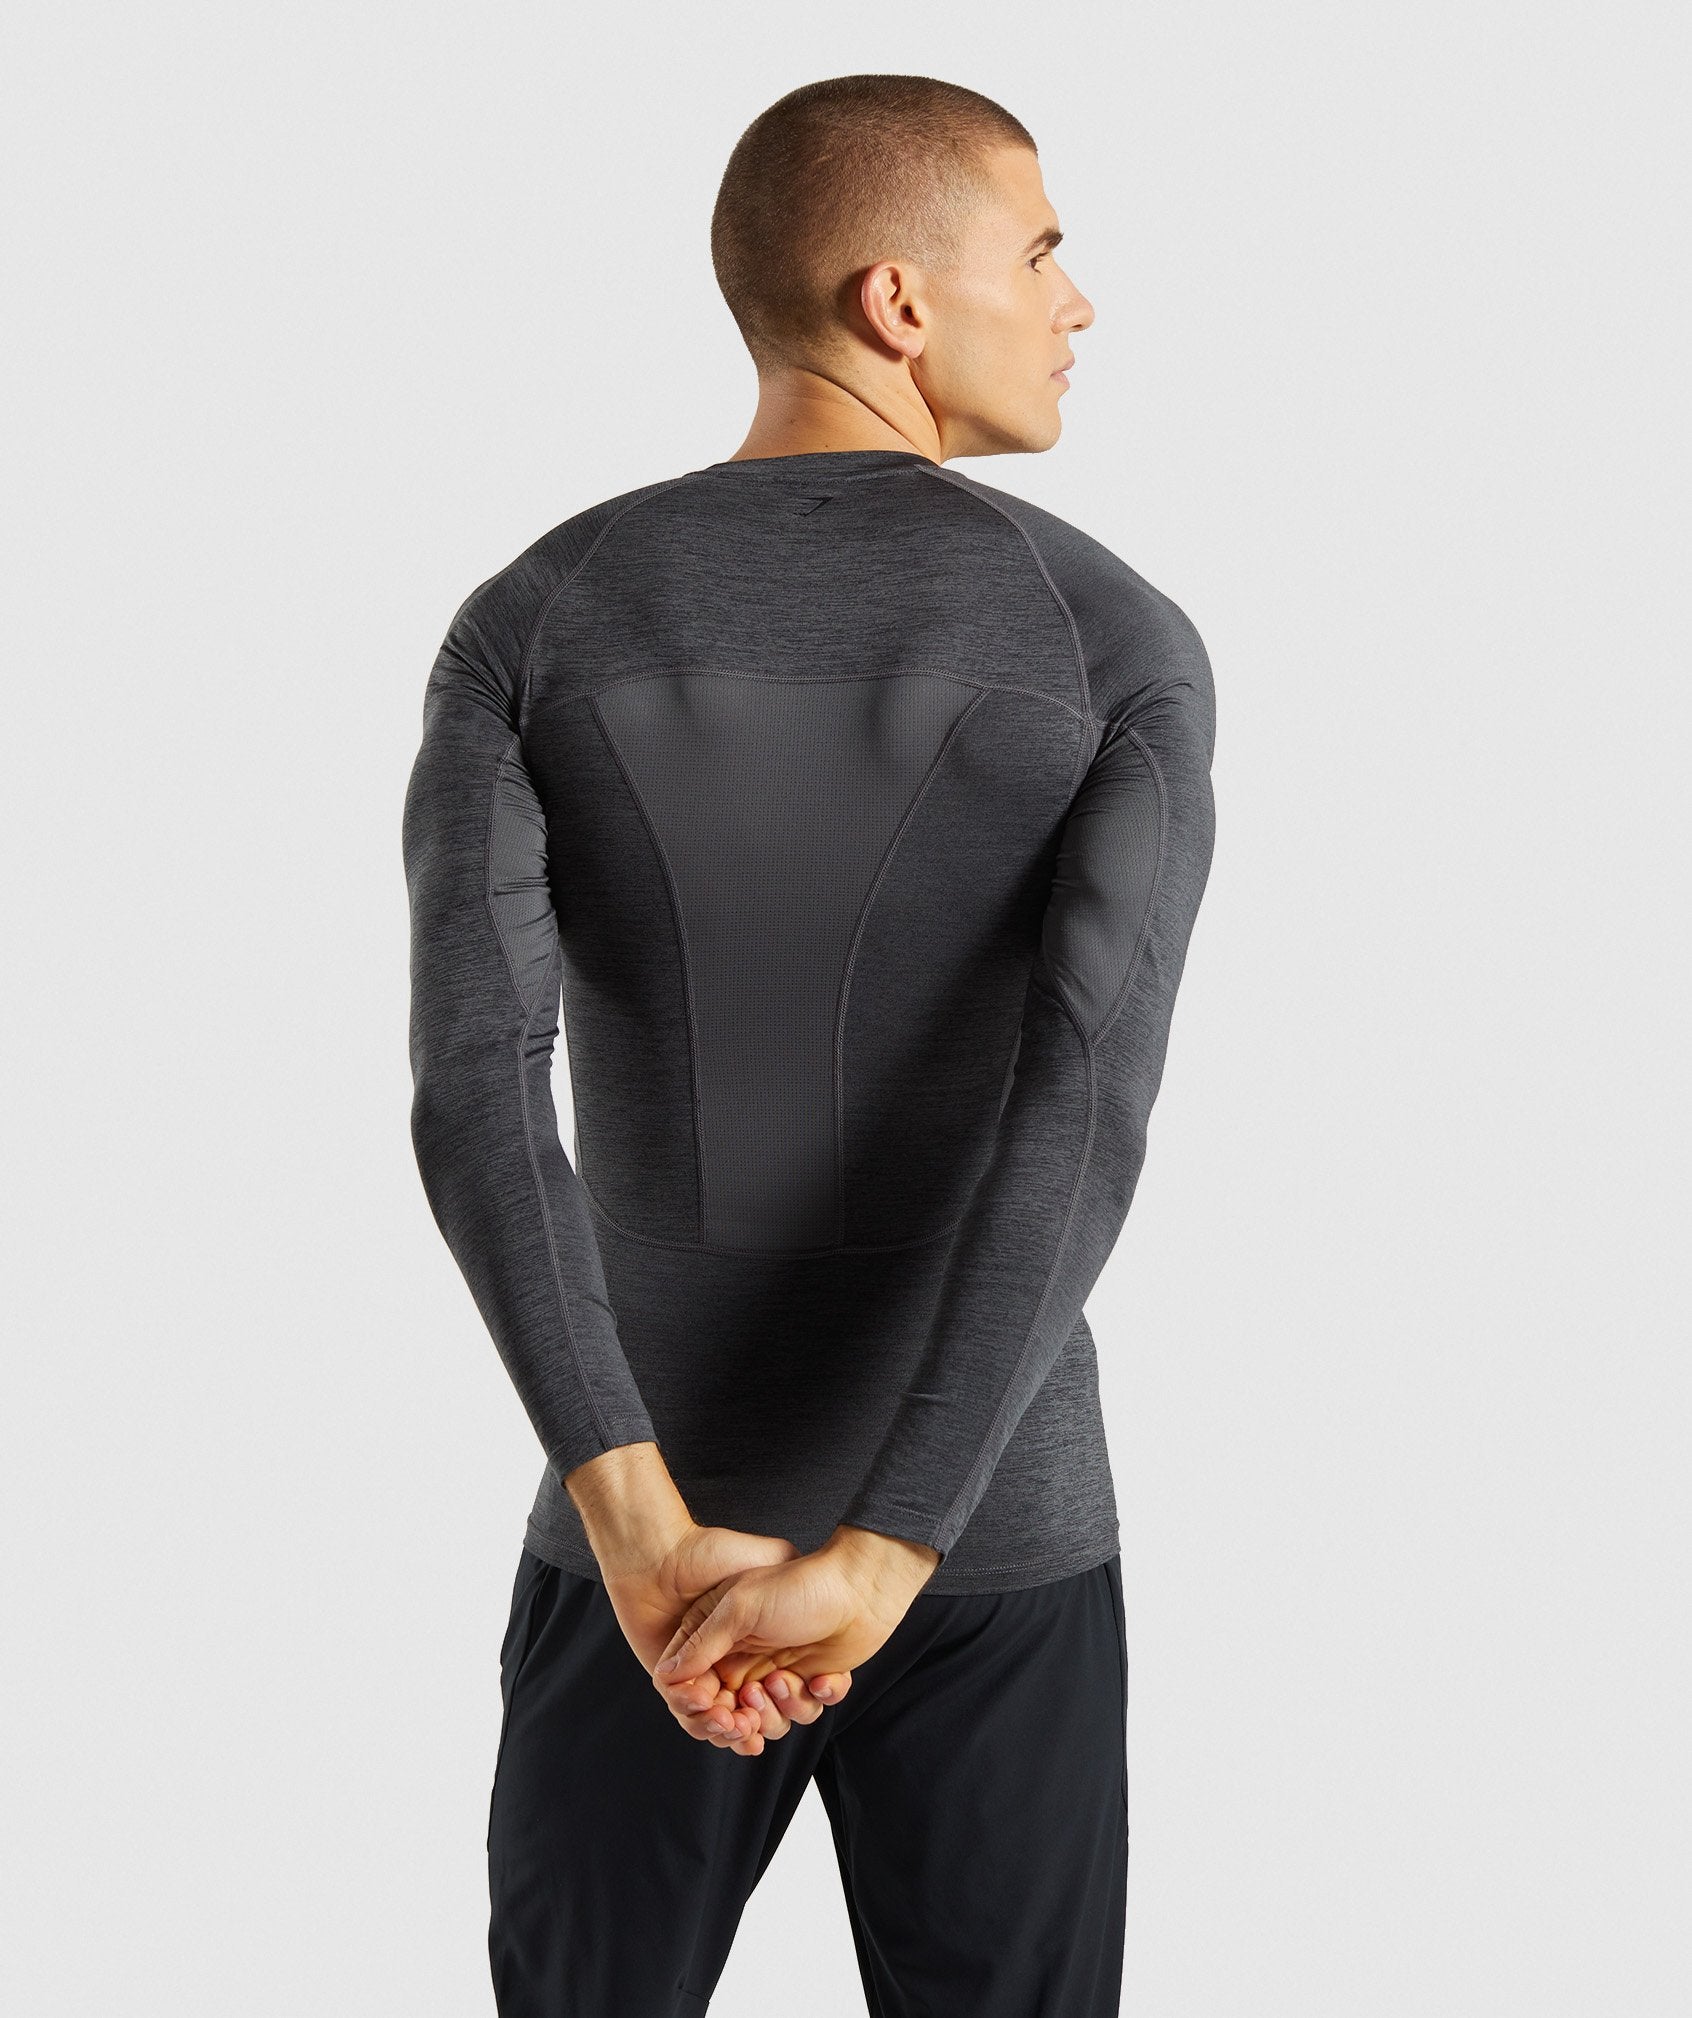 Element+ Baselayer Long Sleeve Top in Black Marl - view 2